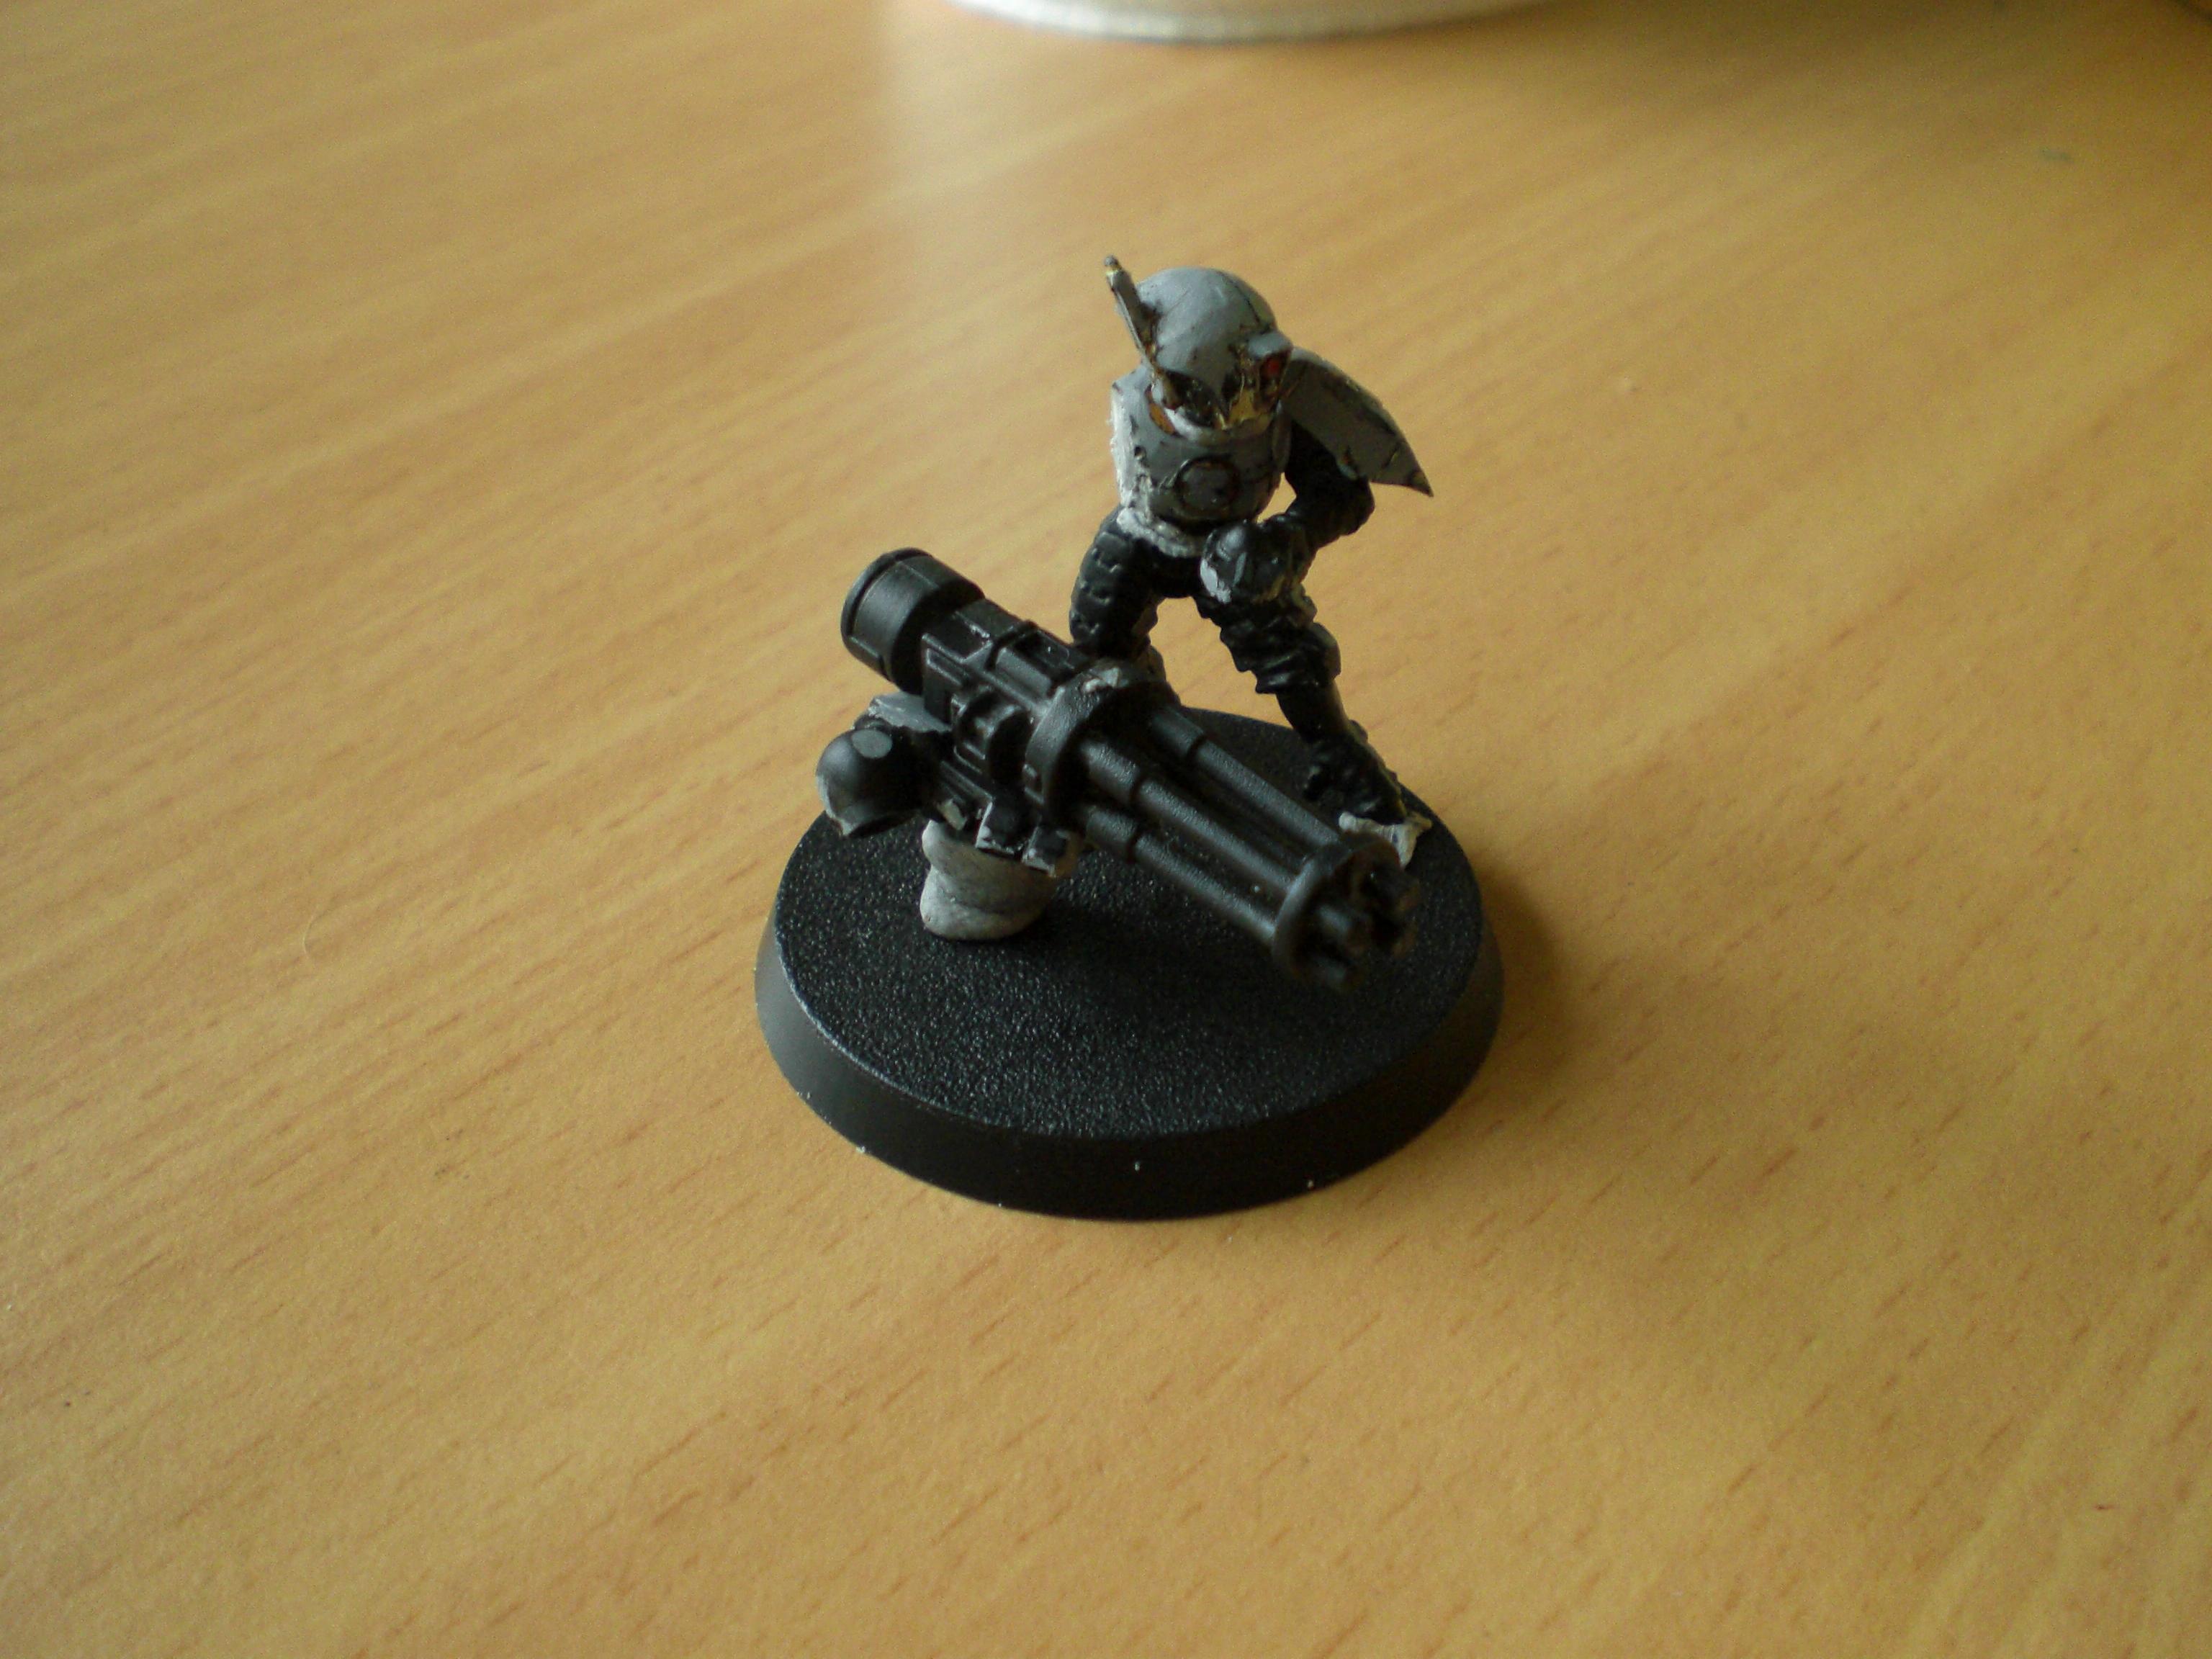 different model, will probally ditch the guy but I like the weapon